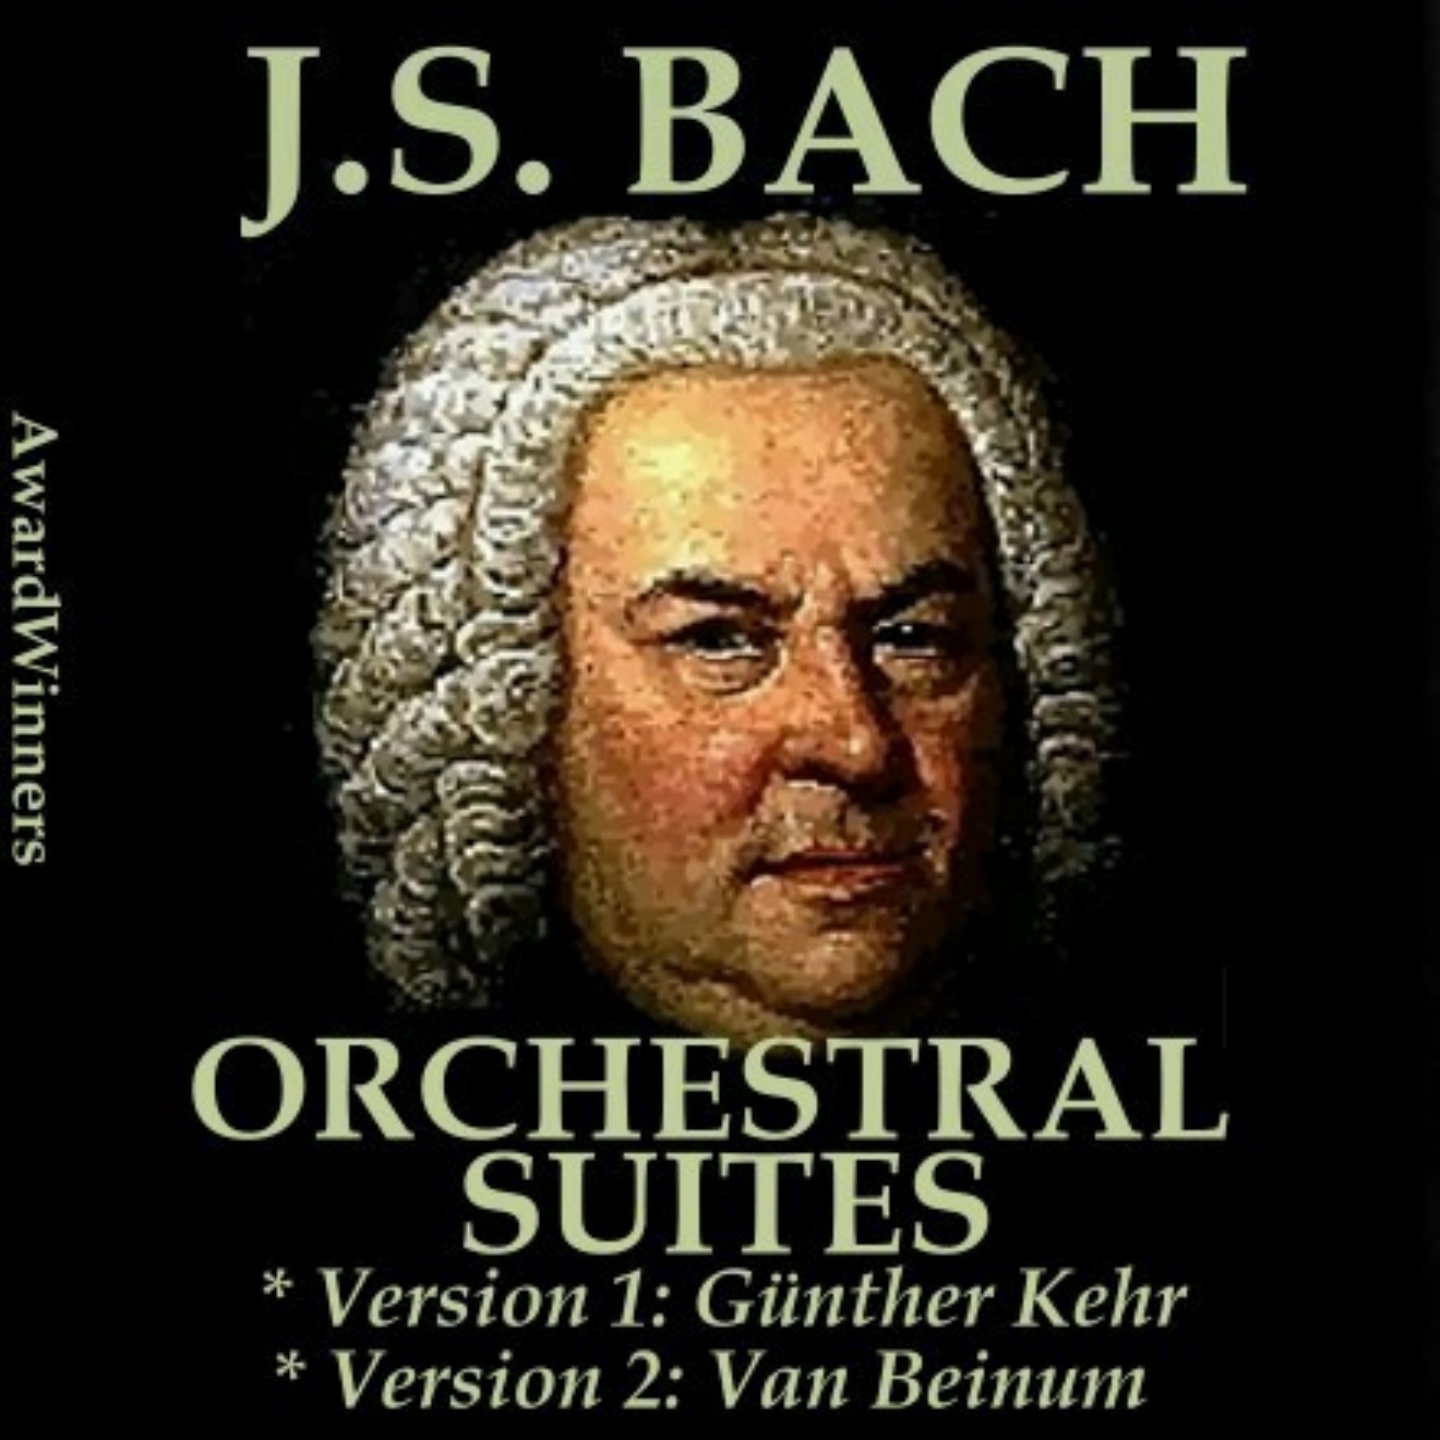 Suite - Overture No. 1 for Orchestra in C Major, BWV1066: VII. Passepieds French Dances I & II